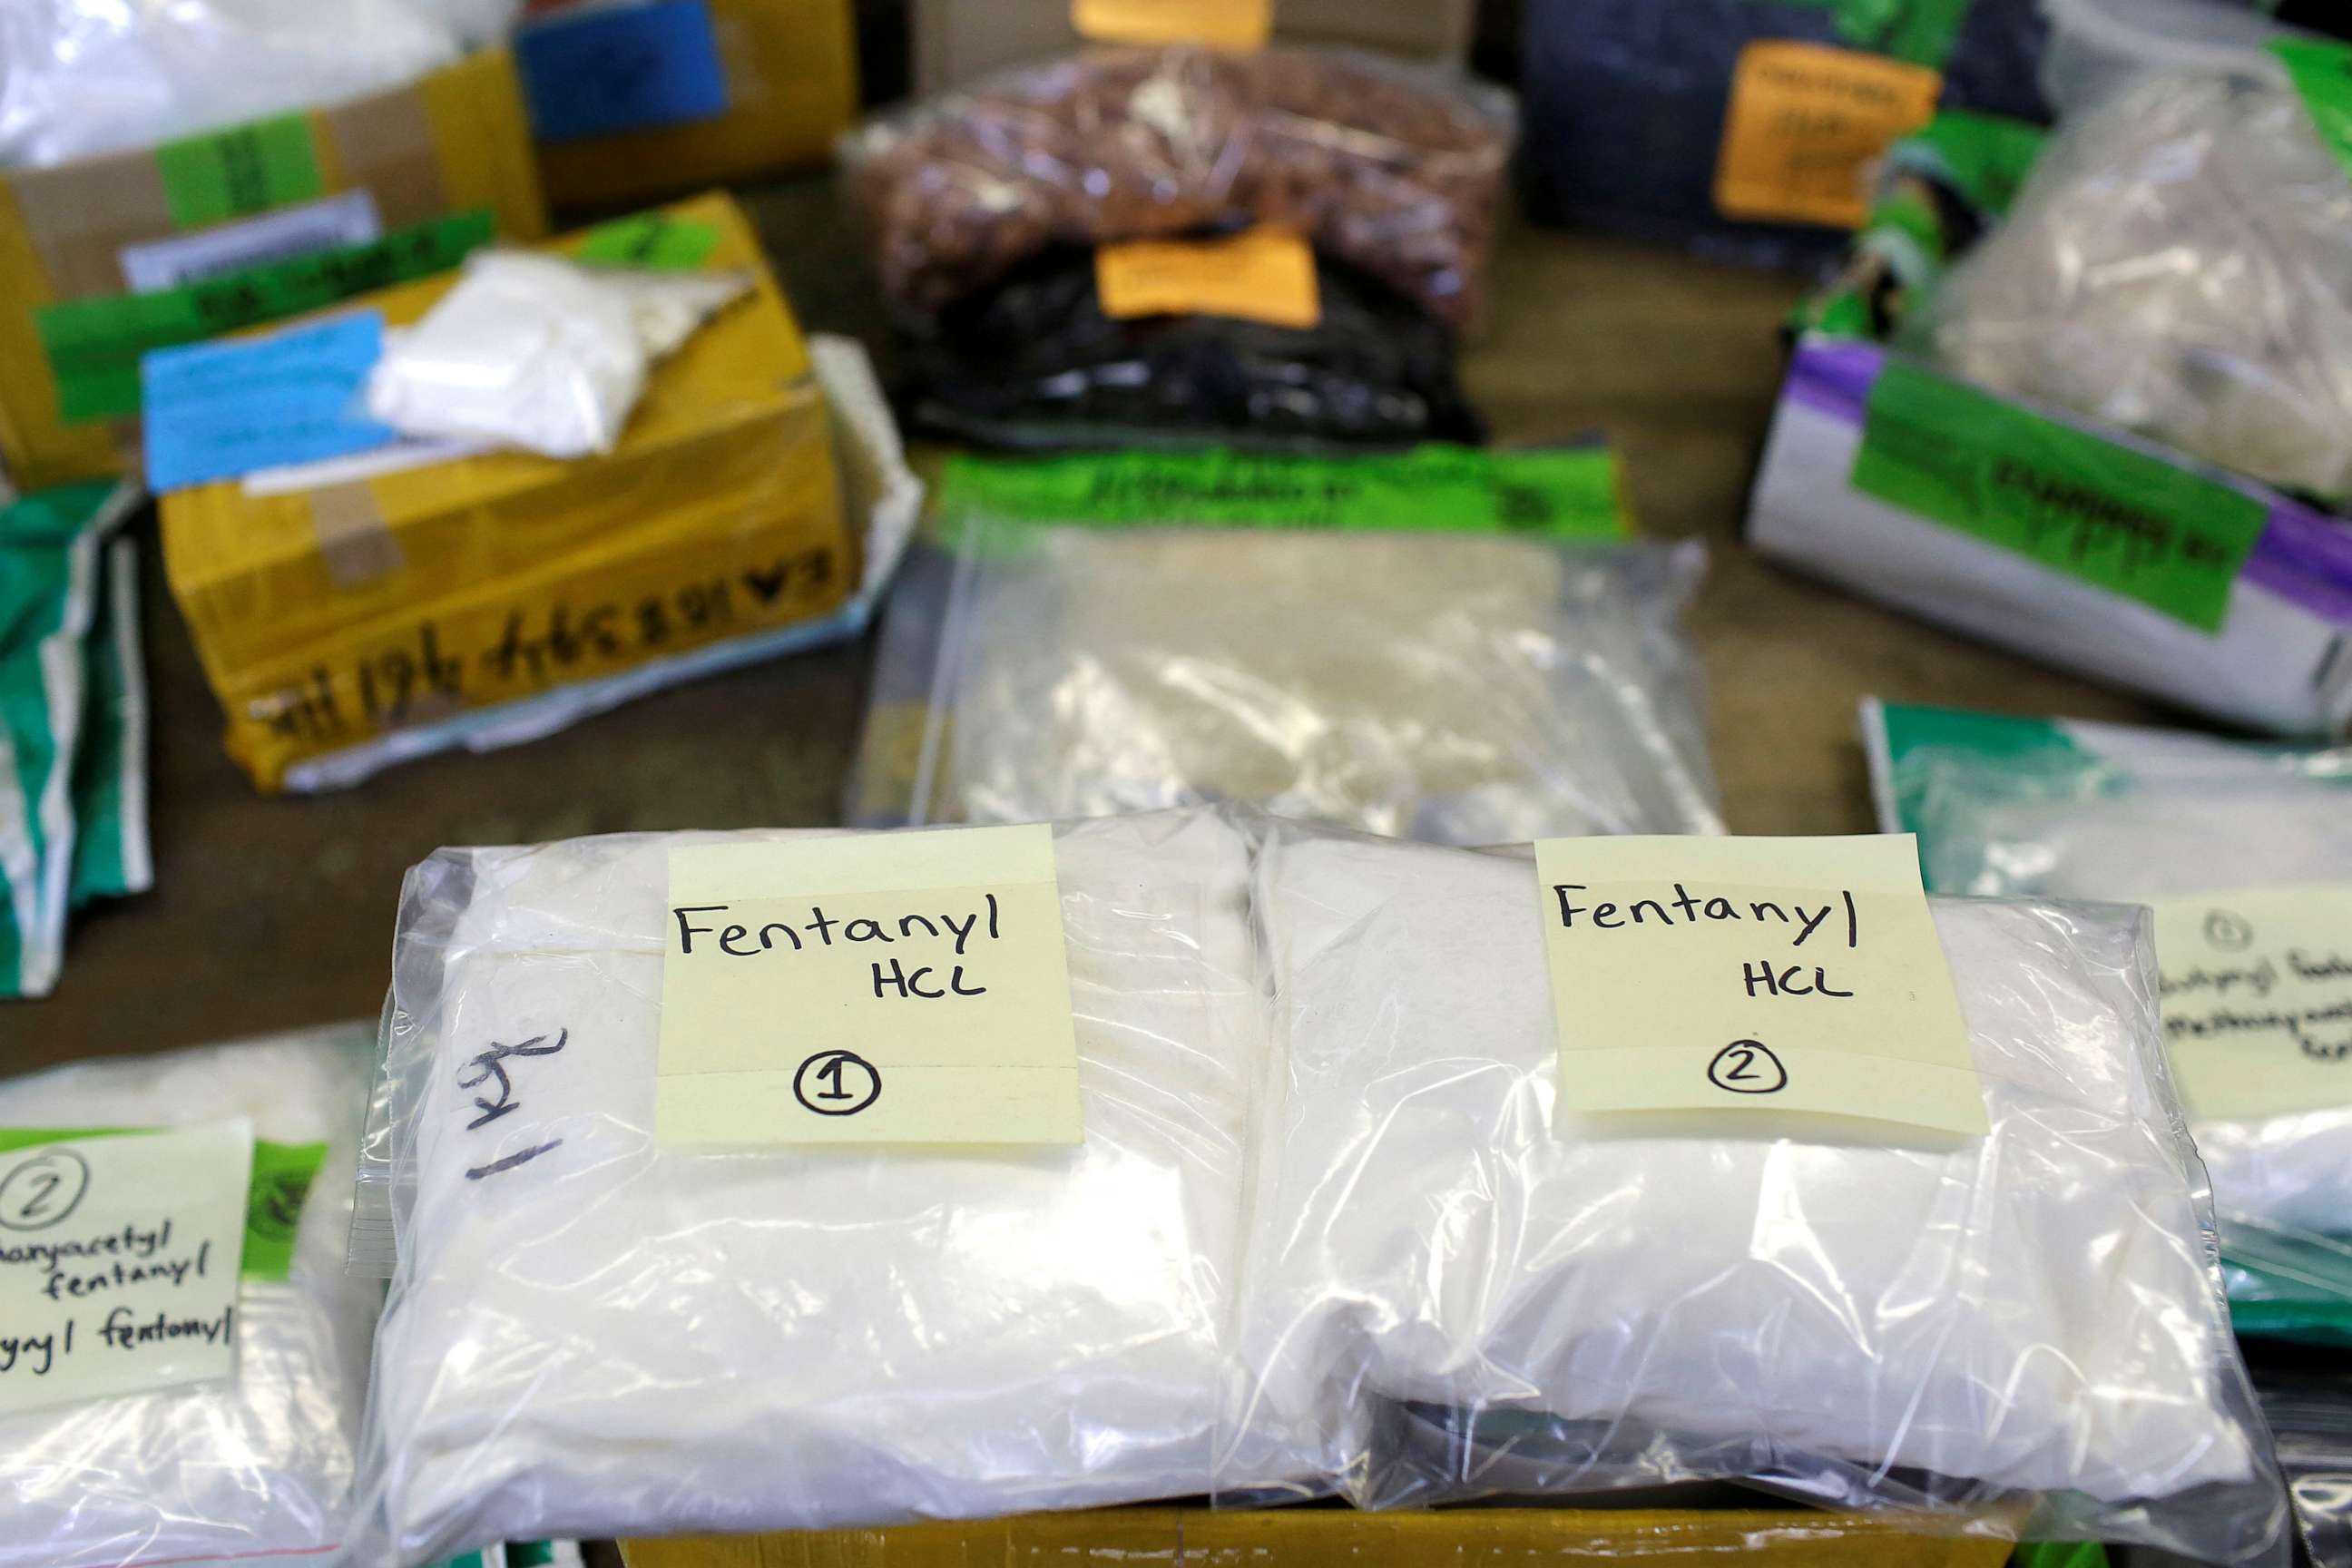 FILE PHOTO: Plastic bags of Fentanyl are displayed on a table at the U.S. Customs and Border Protection area at the International Mail Facility at O'Hare International Airport in Chicago, Illinois, November 29, 2017.